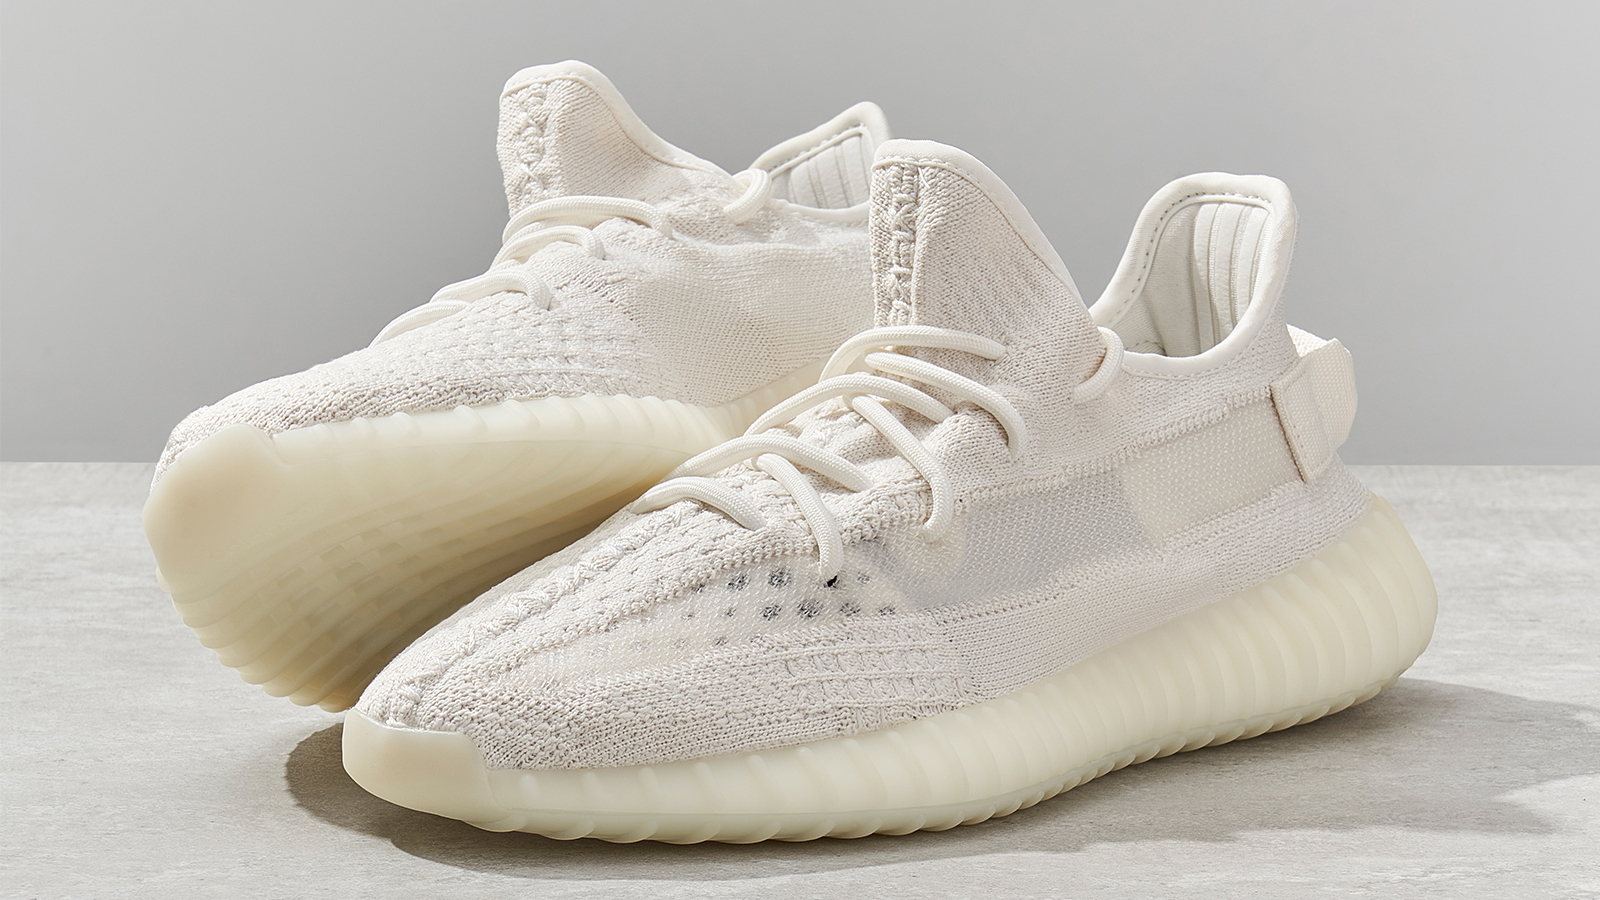 adidas To Resume Yeezy Sales Amidst Questions Surrounding Sustainability